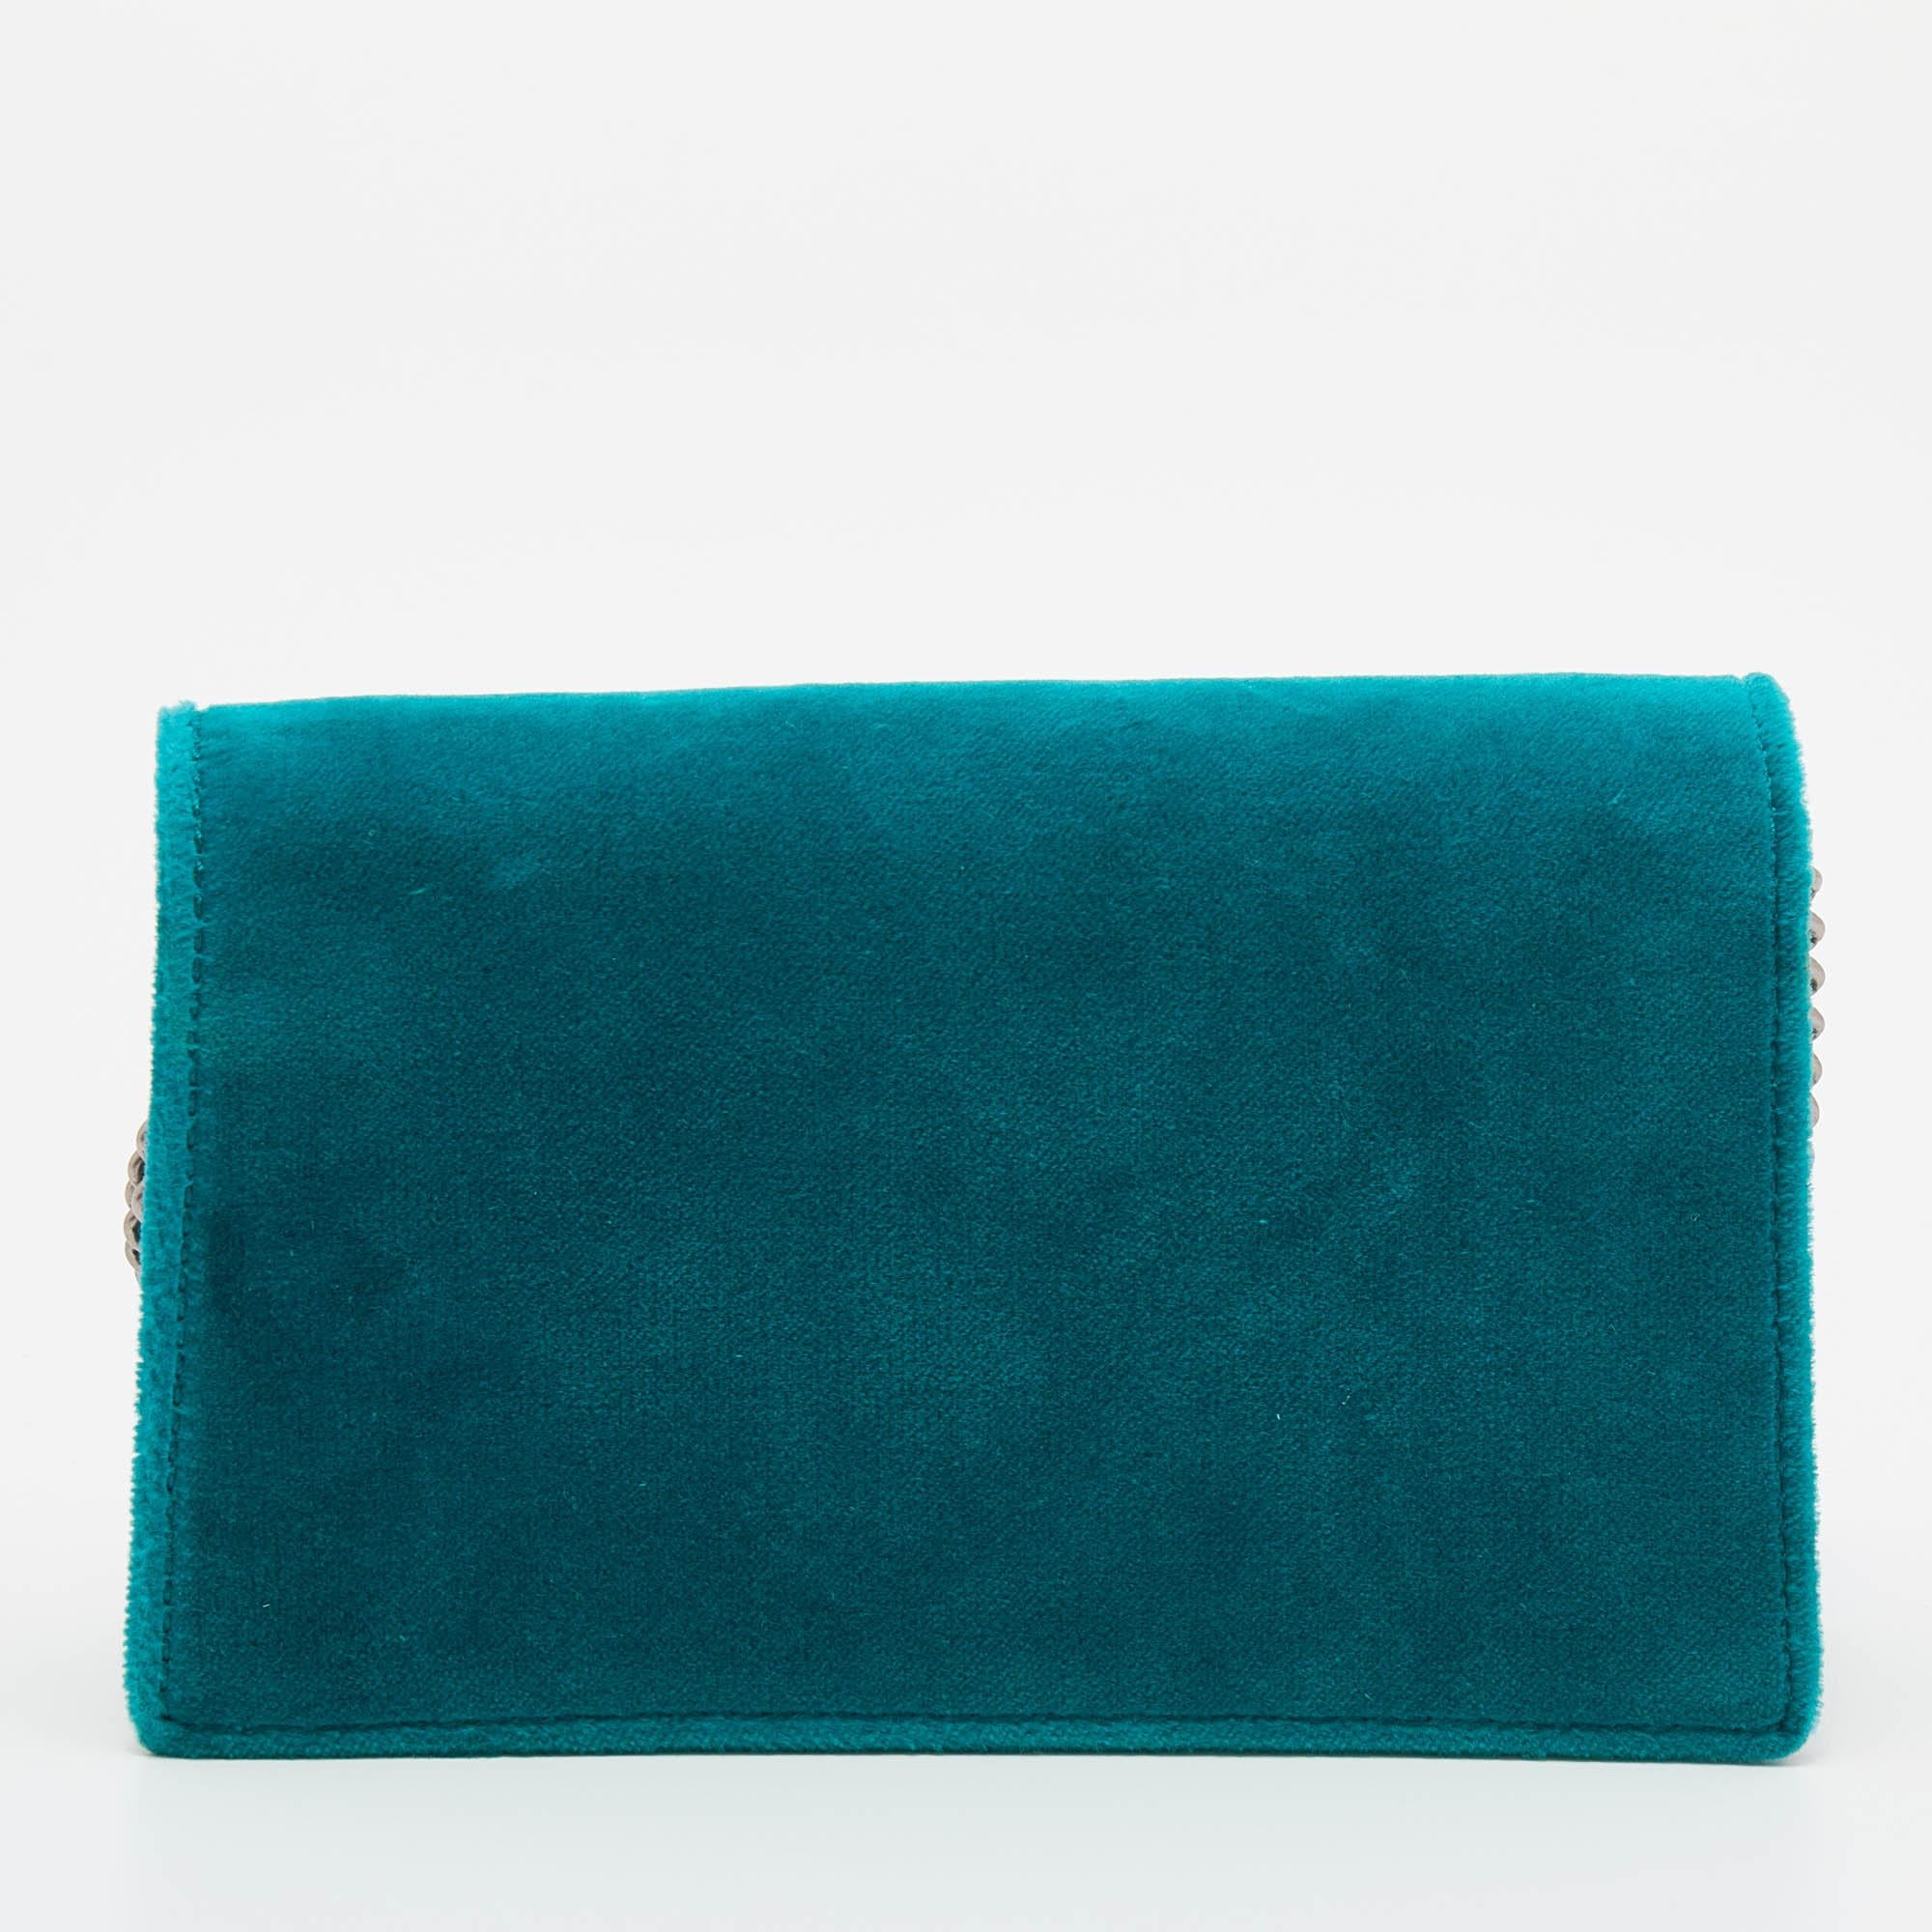 Picture yourself swinging this gorgeous bag that will not only complement your neutral outfits but fetch you endless compliments. This Gucci creation has been beautifully crafted from velvet and leather and features a teal blue exterior. The flap